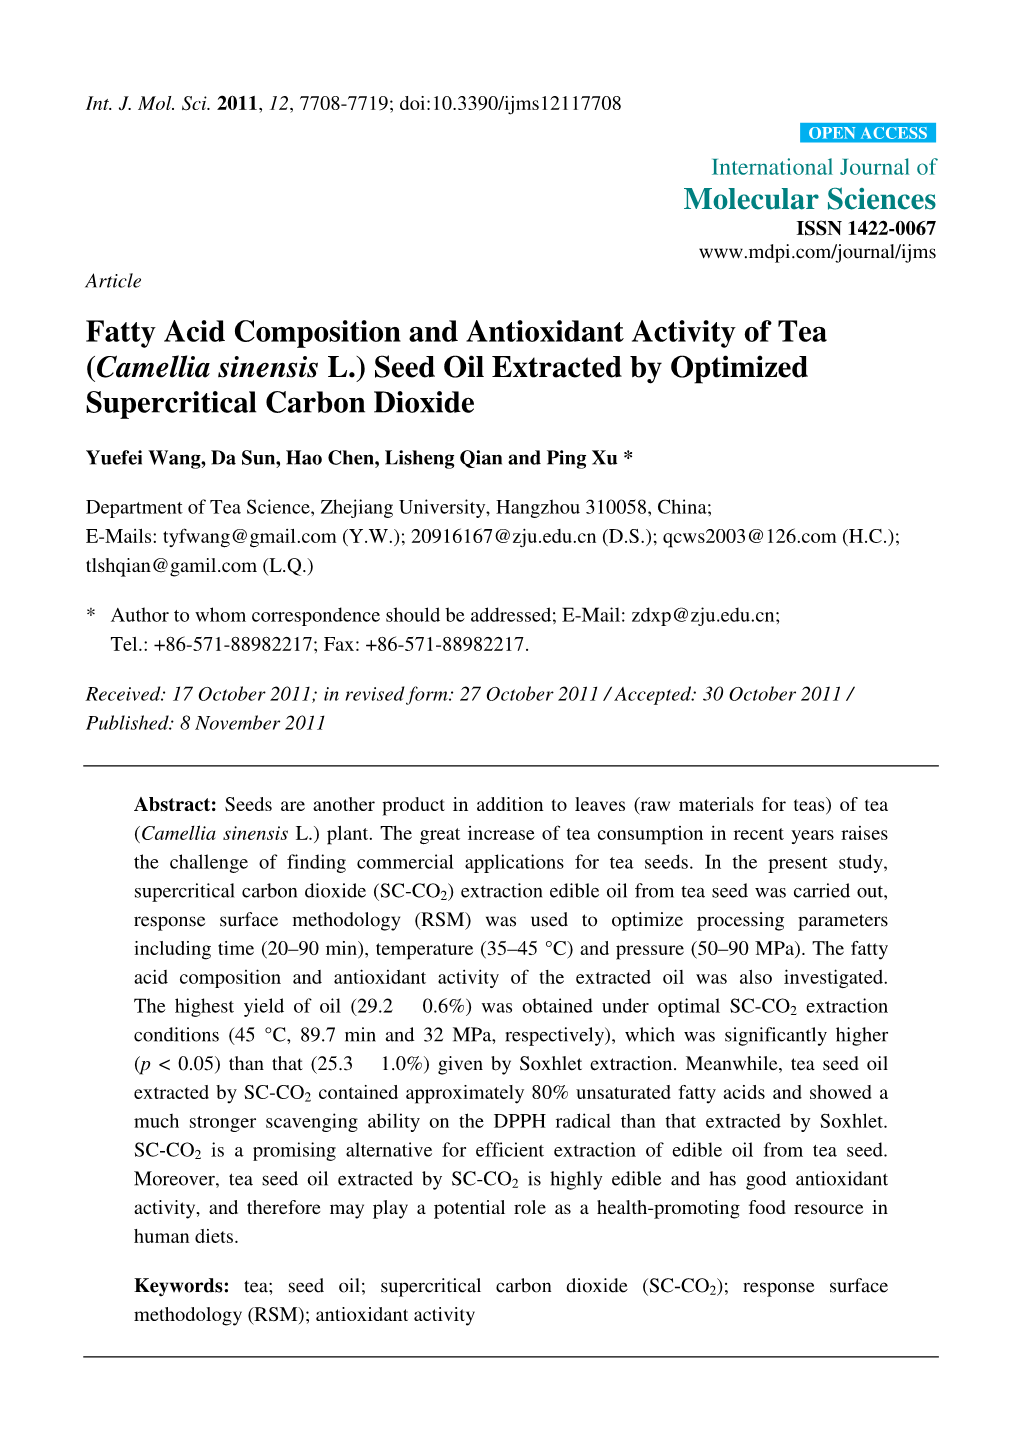 Fatty Acid Composition and Antioxidant Activity of Tea (Camellia Sinensis L.) Seed Oil Extracted by Optimized Supercritical Carbon Dioxide